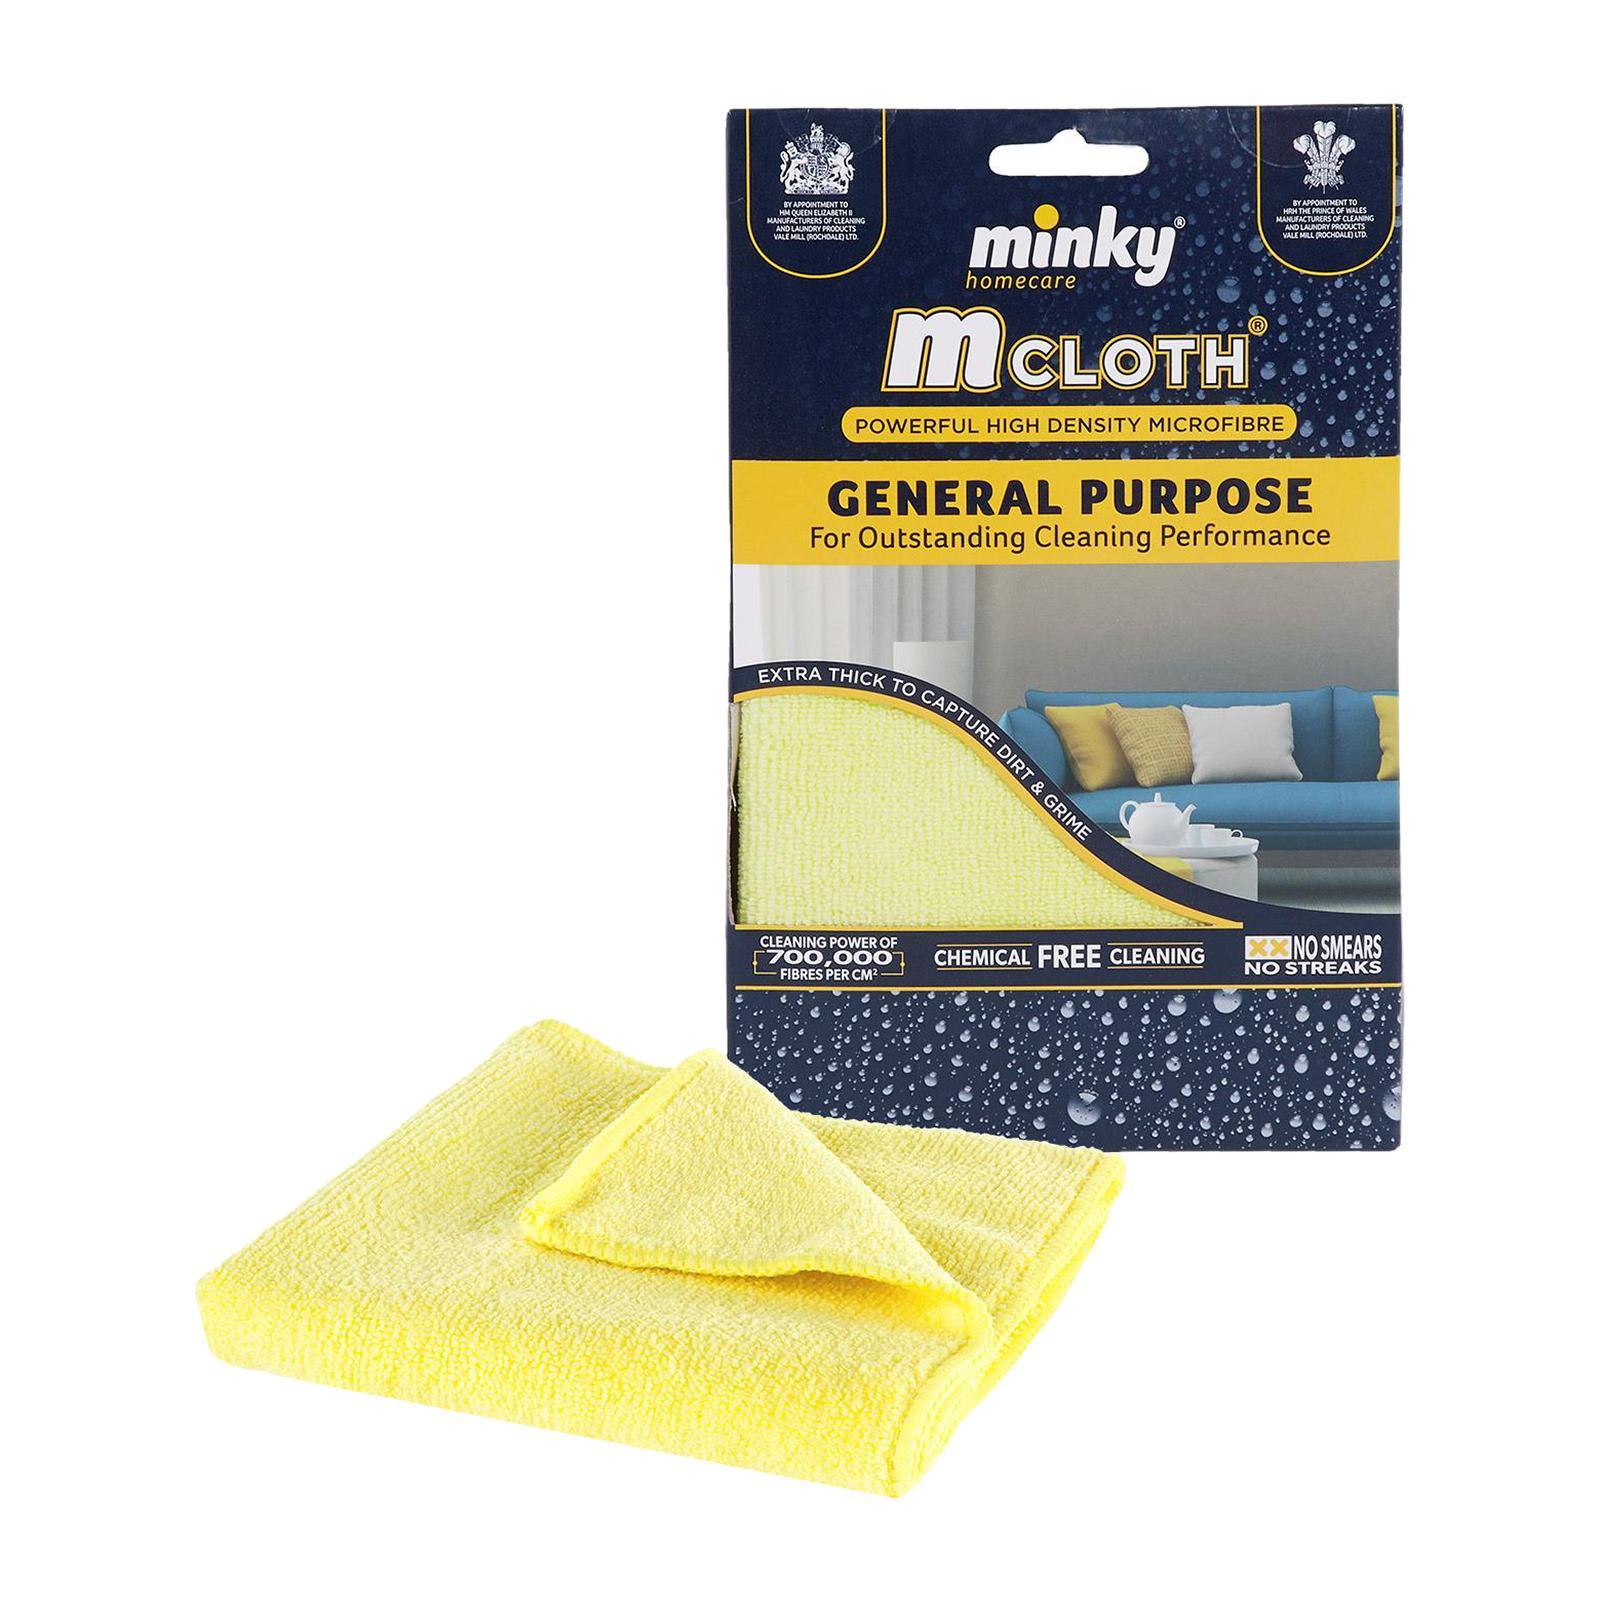 Minky - M Cloth Anti-Bacterial Stainless Steel